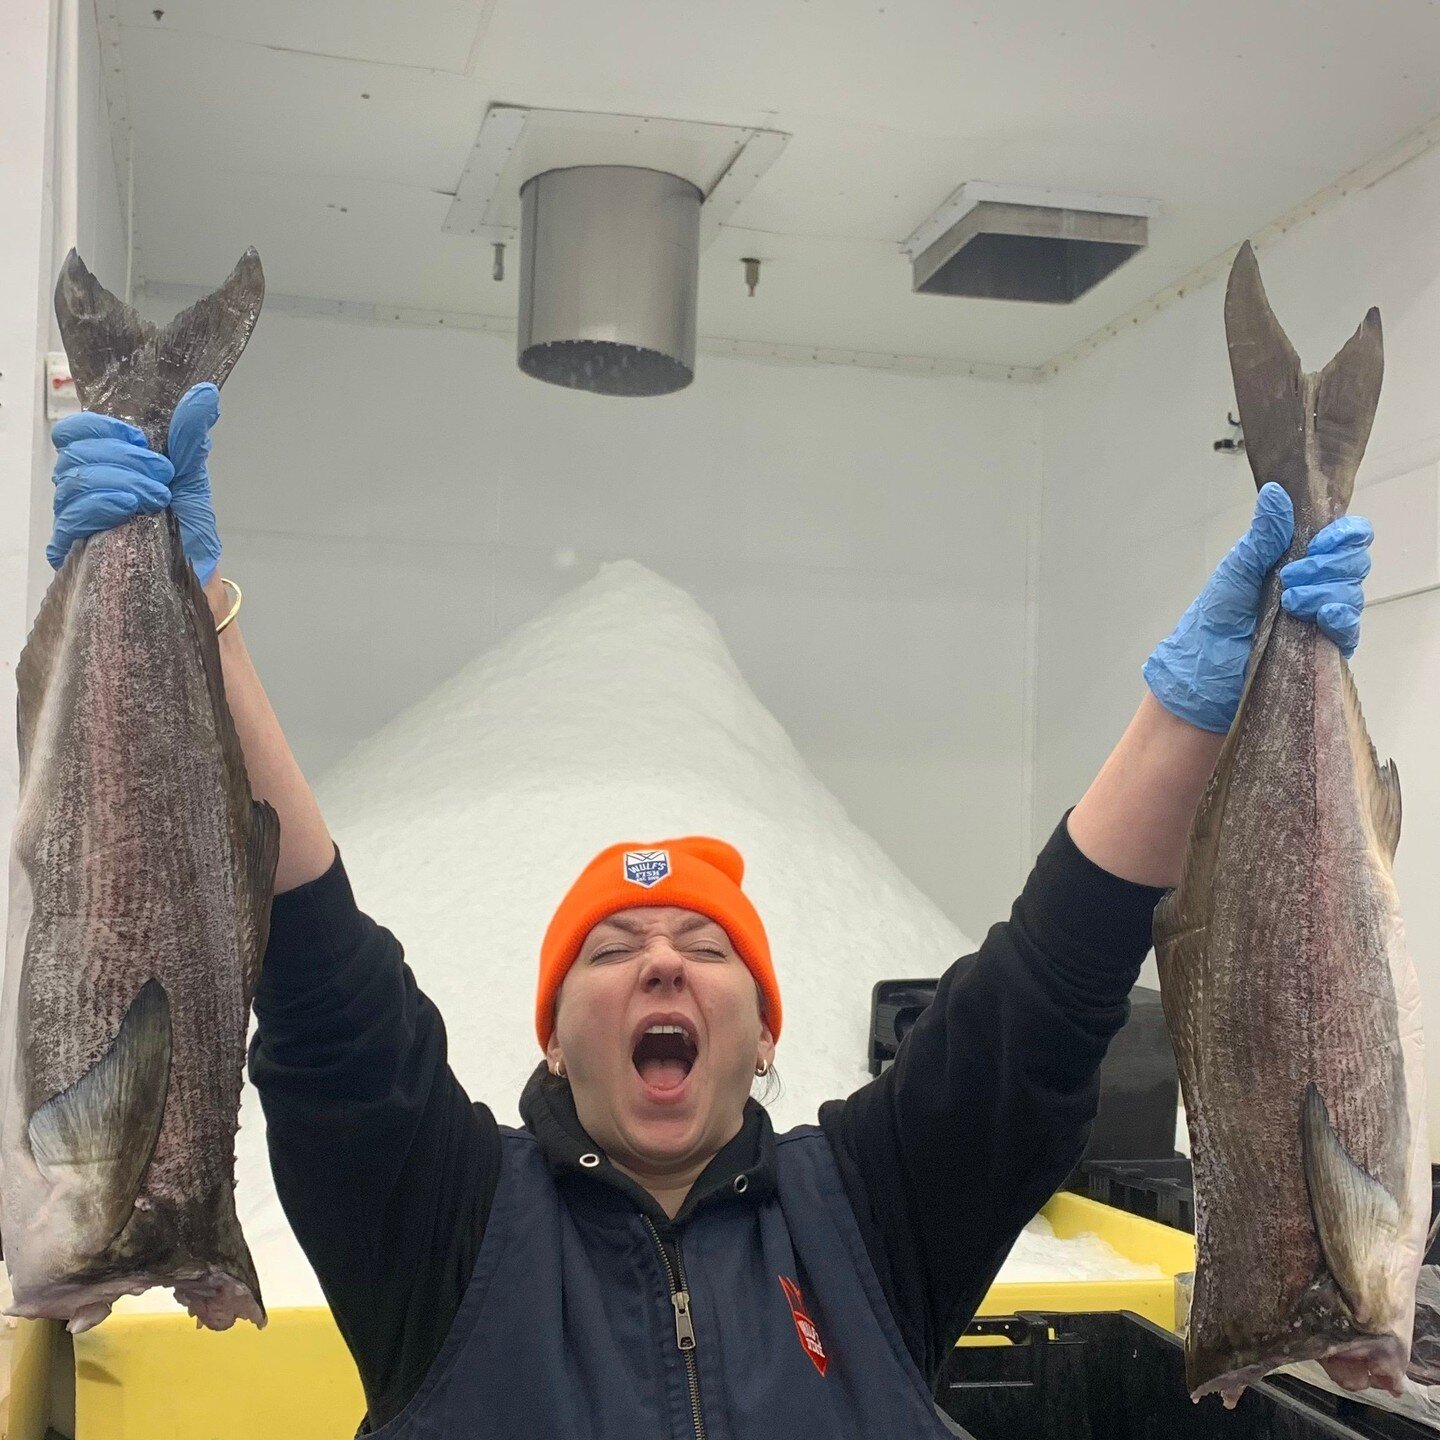 COBIA! You'll be feeling like a champion with a couple of these in your kitchen. Available whole as-is, scaled &amp; gutted, or as fillets.⁠
⁠
Cobia's light, clean taste and meaty, satisfying texture compliments a wide range of cooking methods and fl